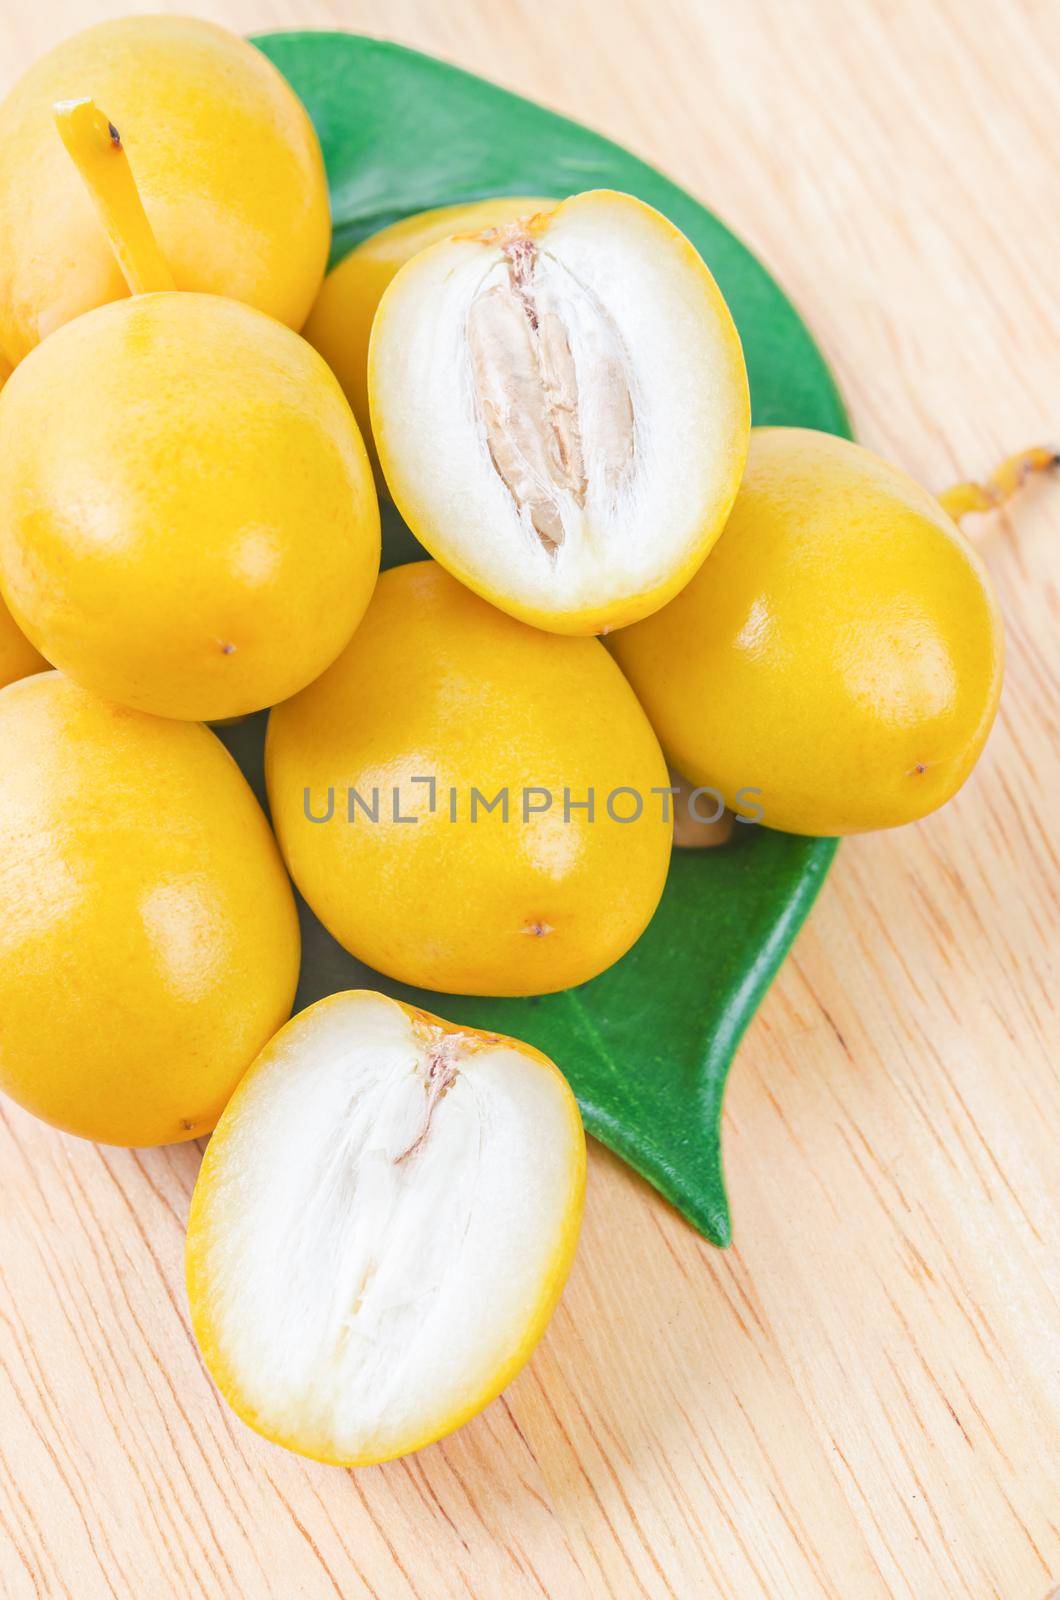 Fresh date palm fruits with green leaf on wooden background.